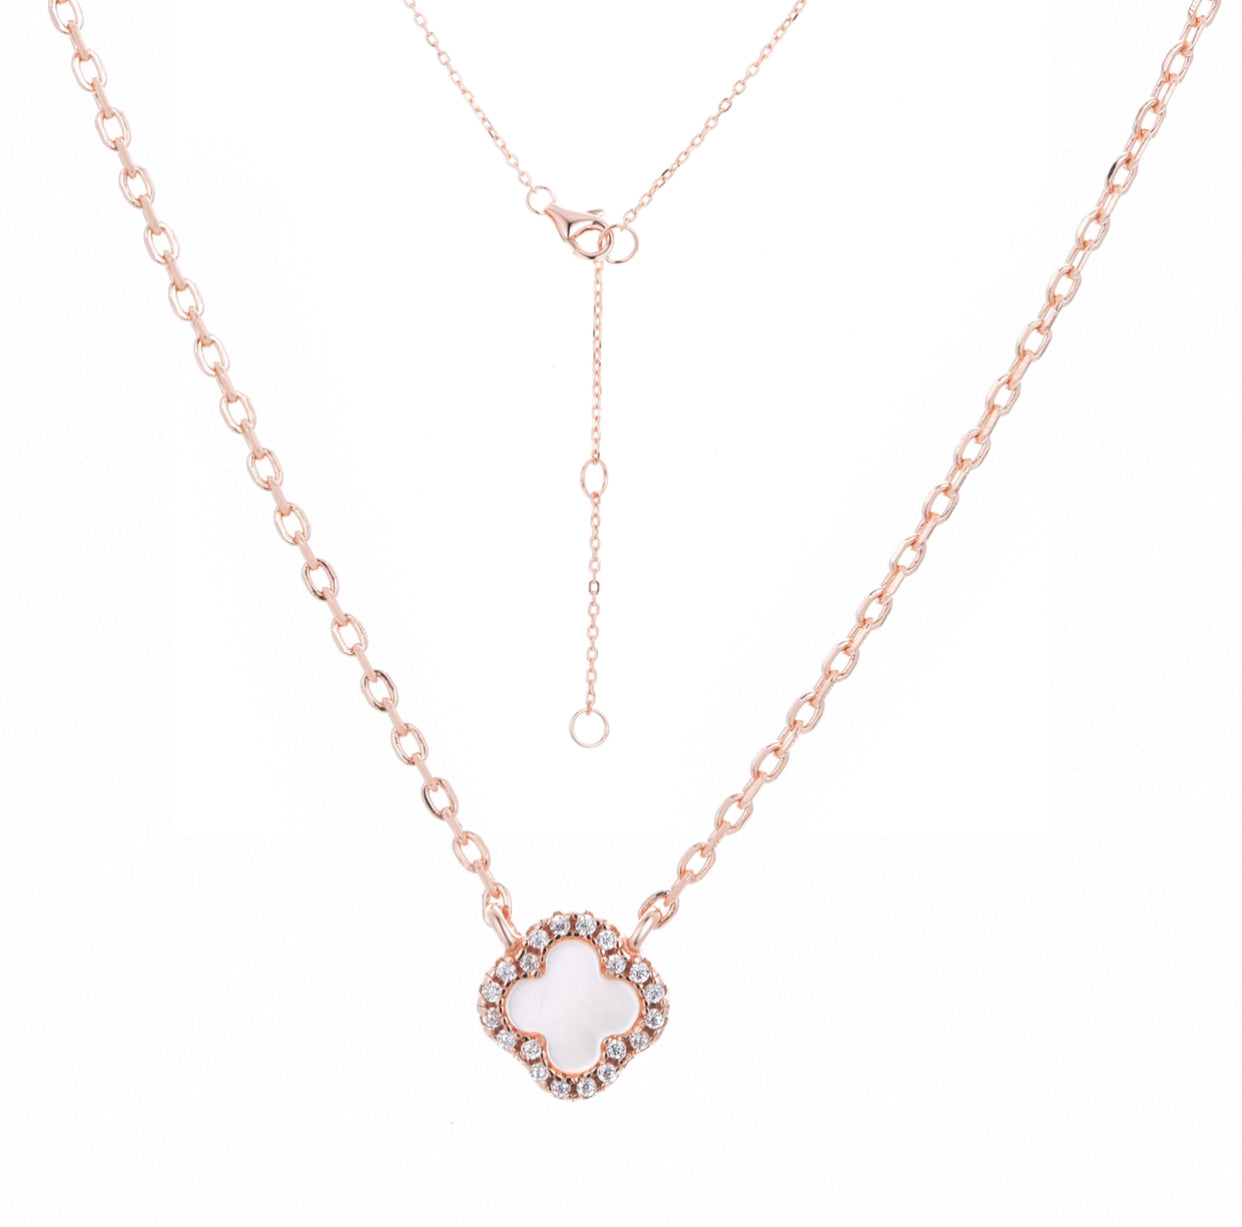 KIARA MINI MOTHER OF PEARL CLOVER ROSE GOLD NECKLACE